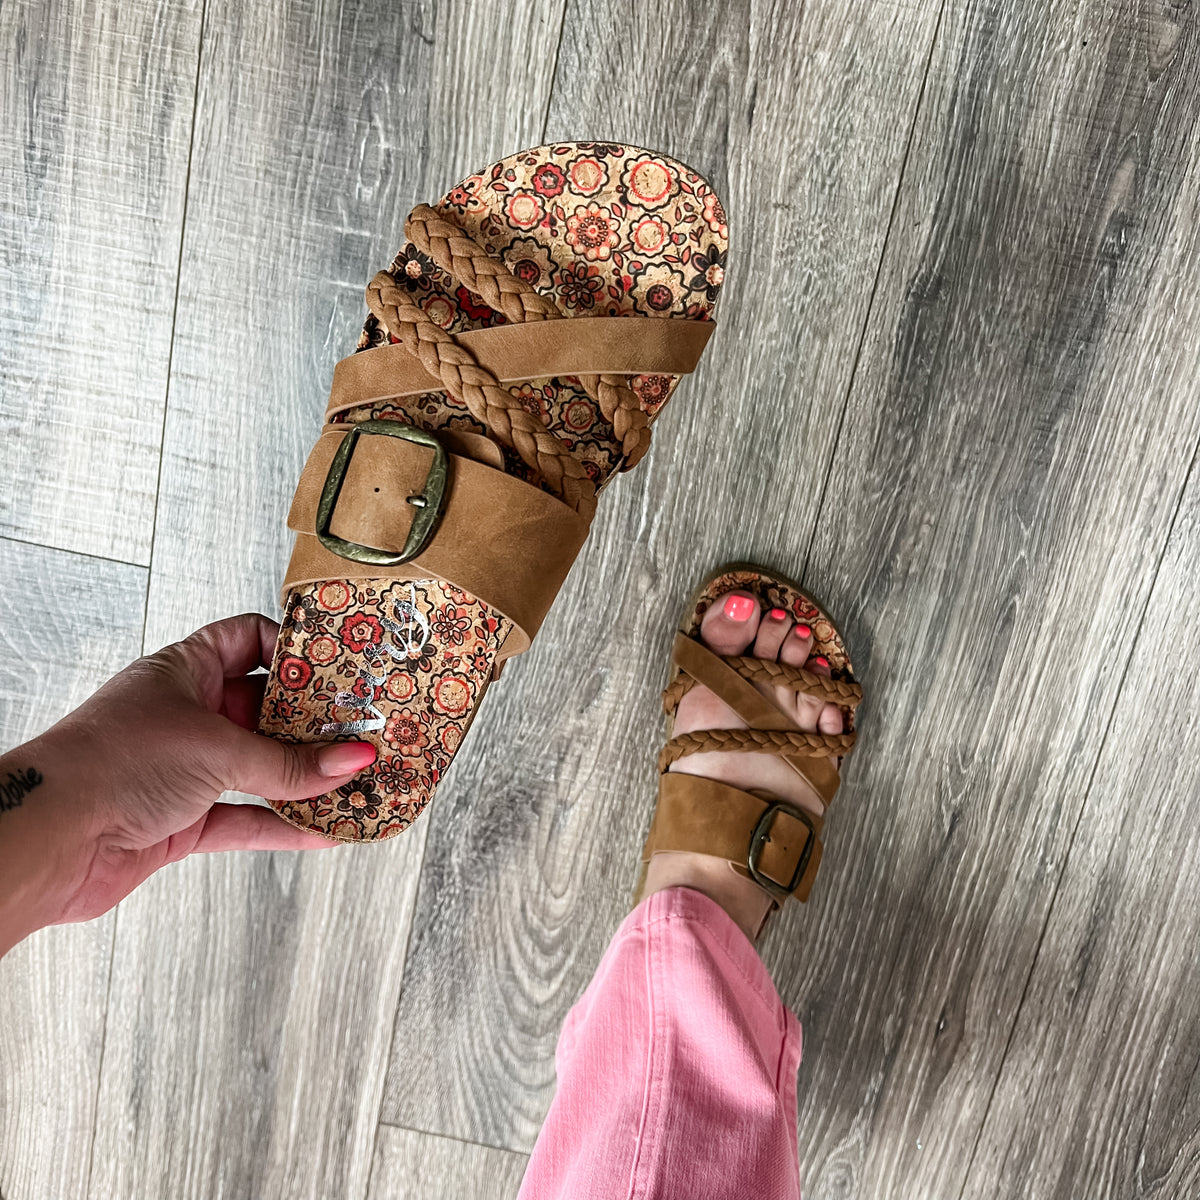 "Nora 2" Cork Bottom Sandal with Buckle and Braid Detail By Very G (Tan)